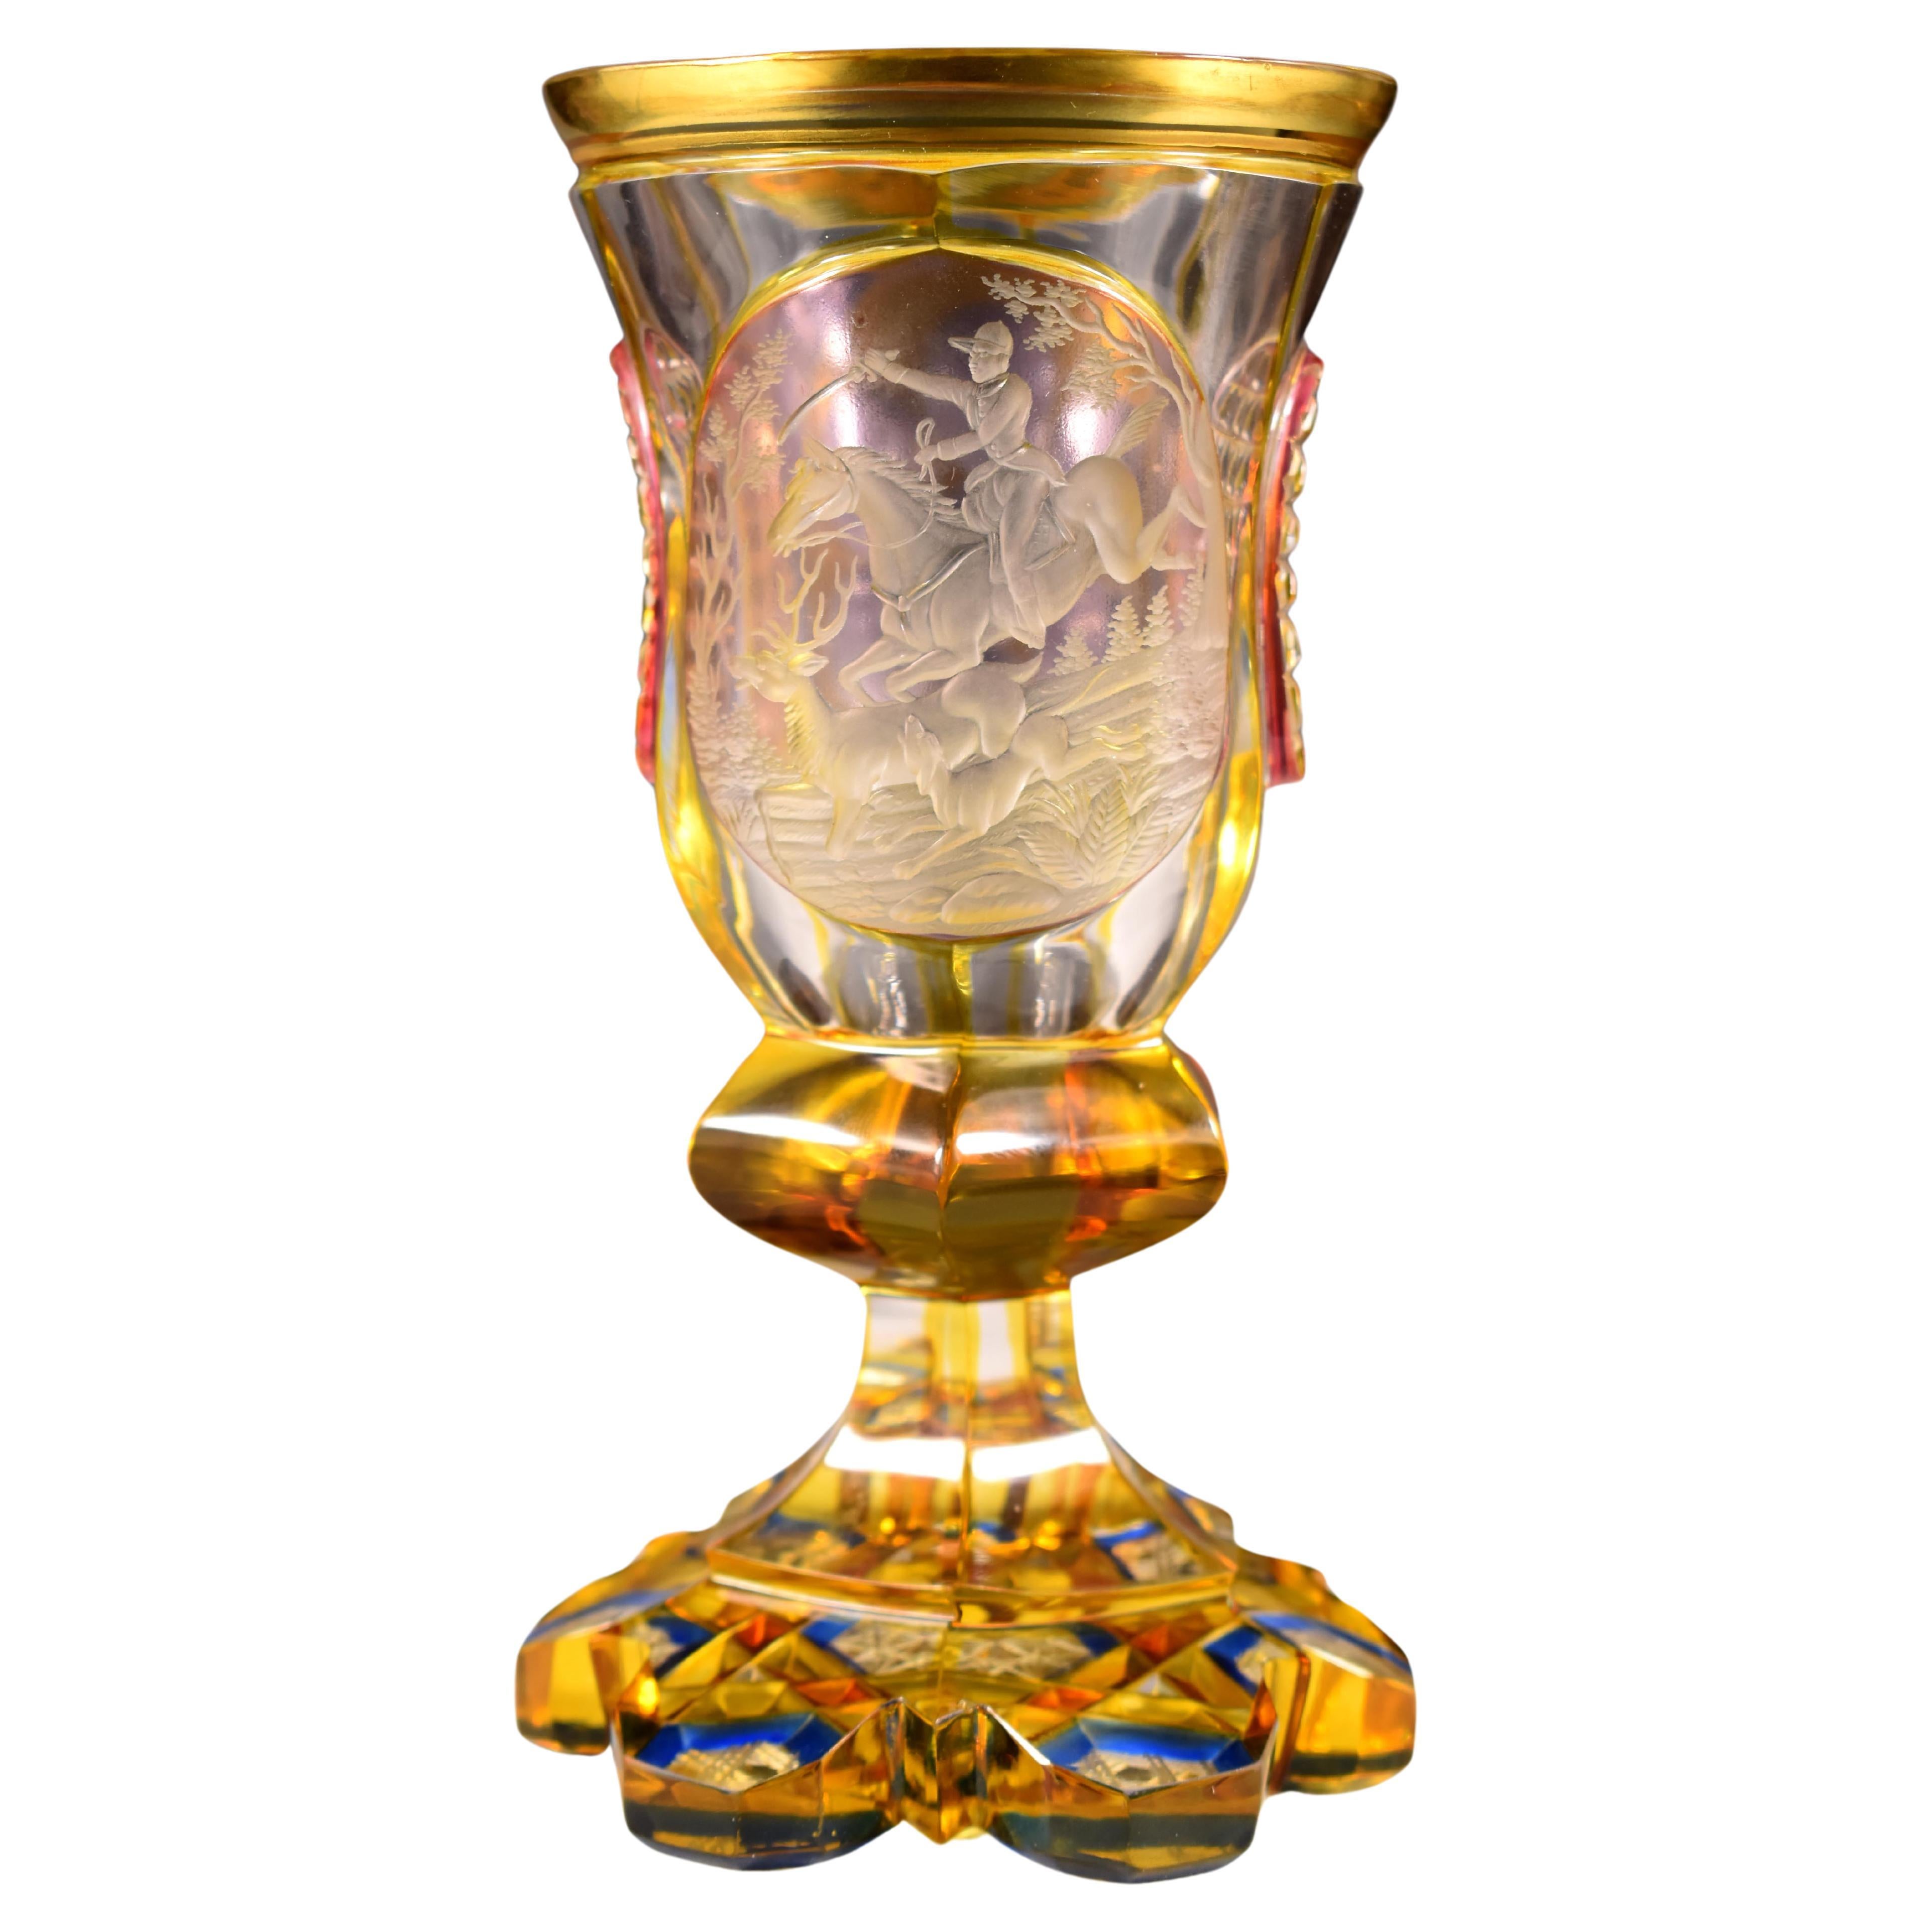 Antique Engraved Goblet Hunting motif 19-20 century Bohemian Glass For Sale